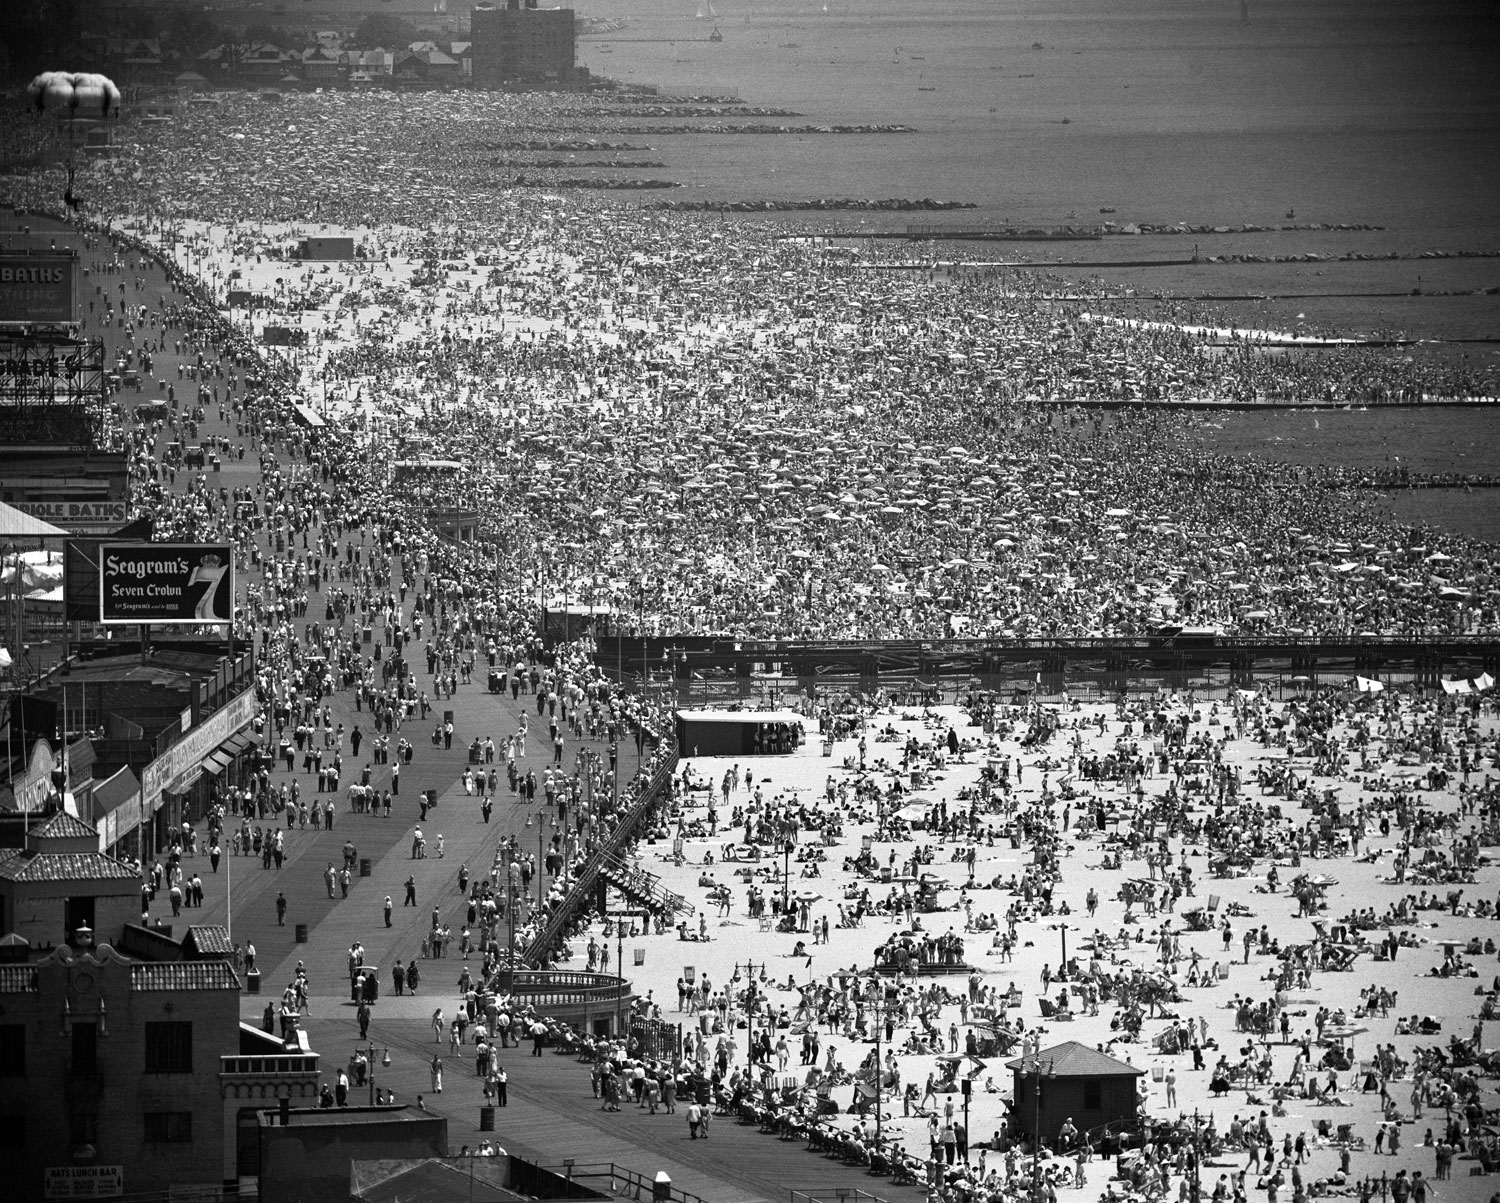 Crowds fill Coney Island's beaches on the Fourth of July, Brooklyn, New York, 1949.